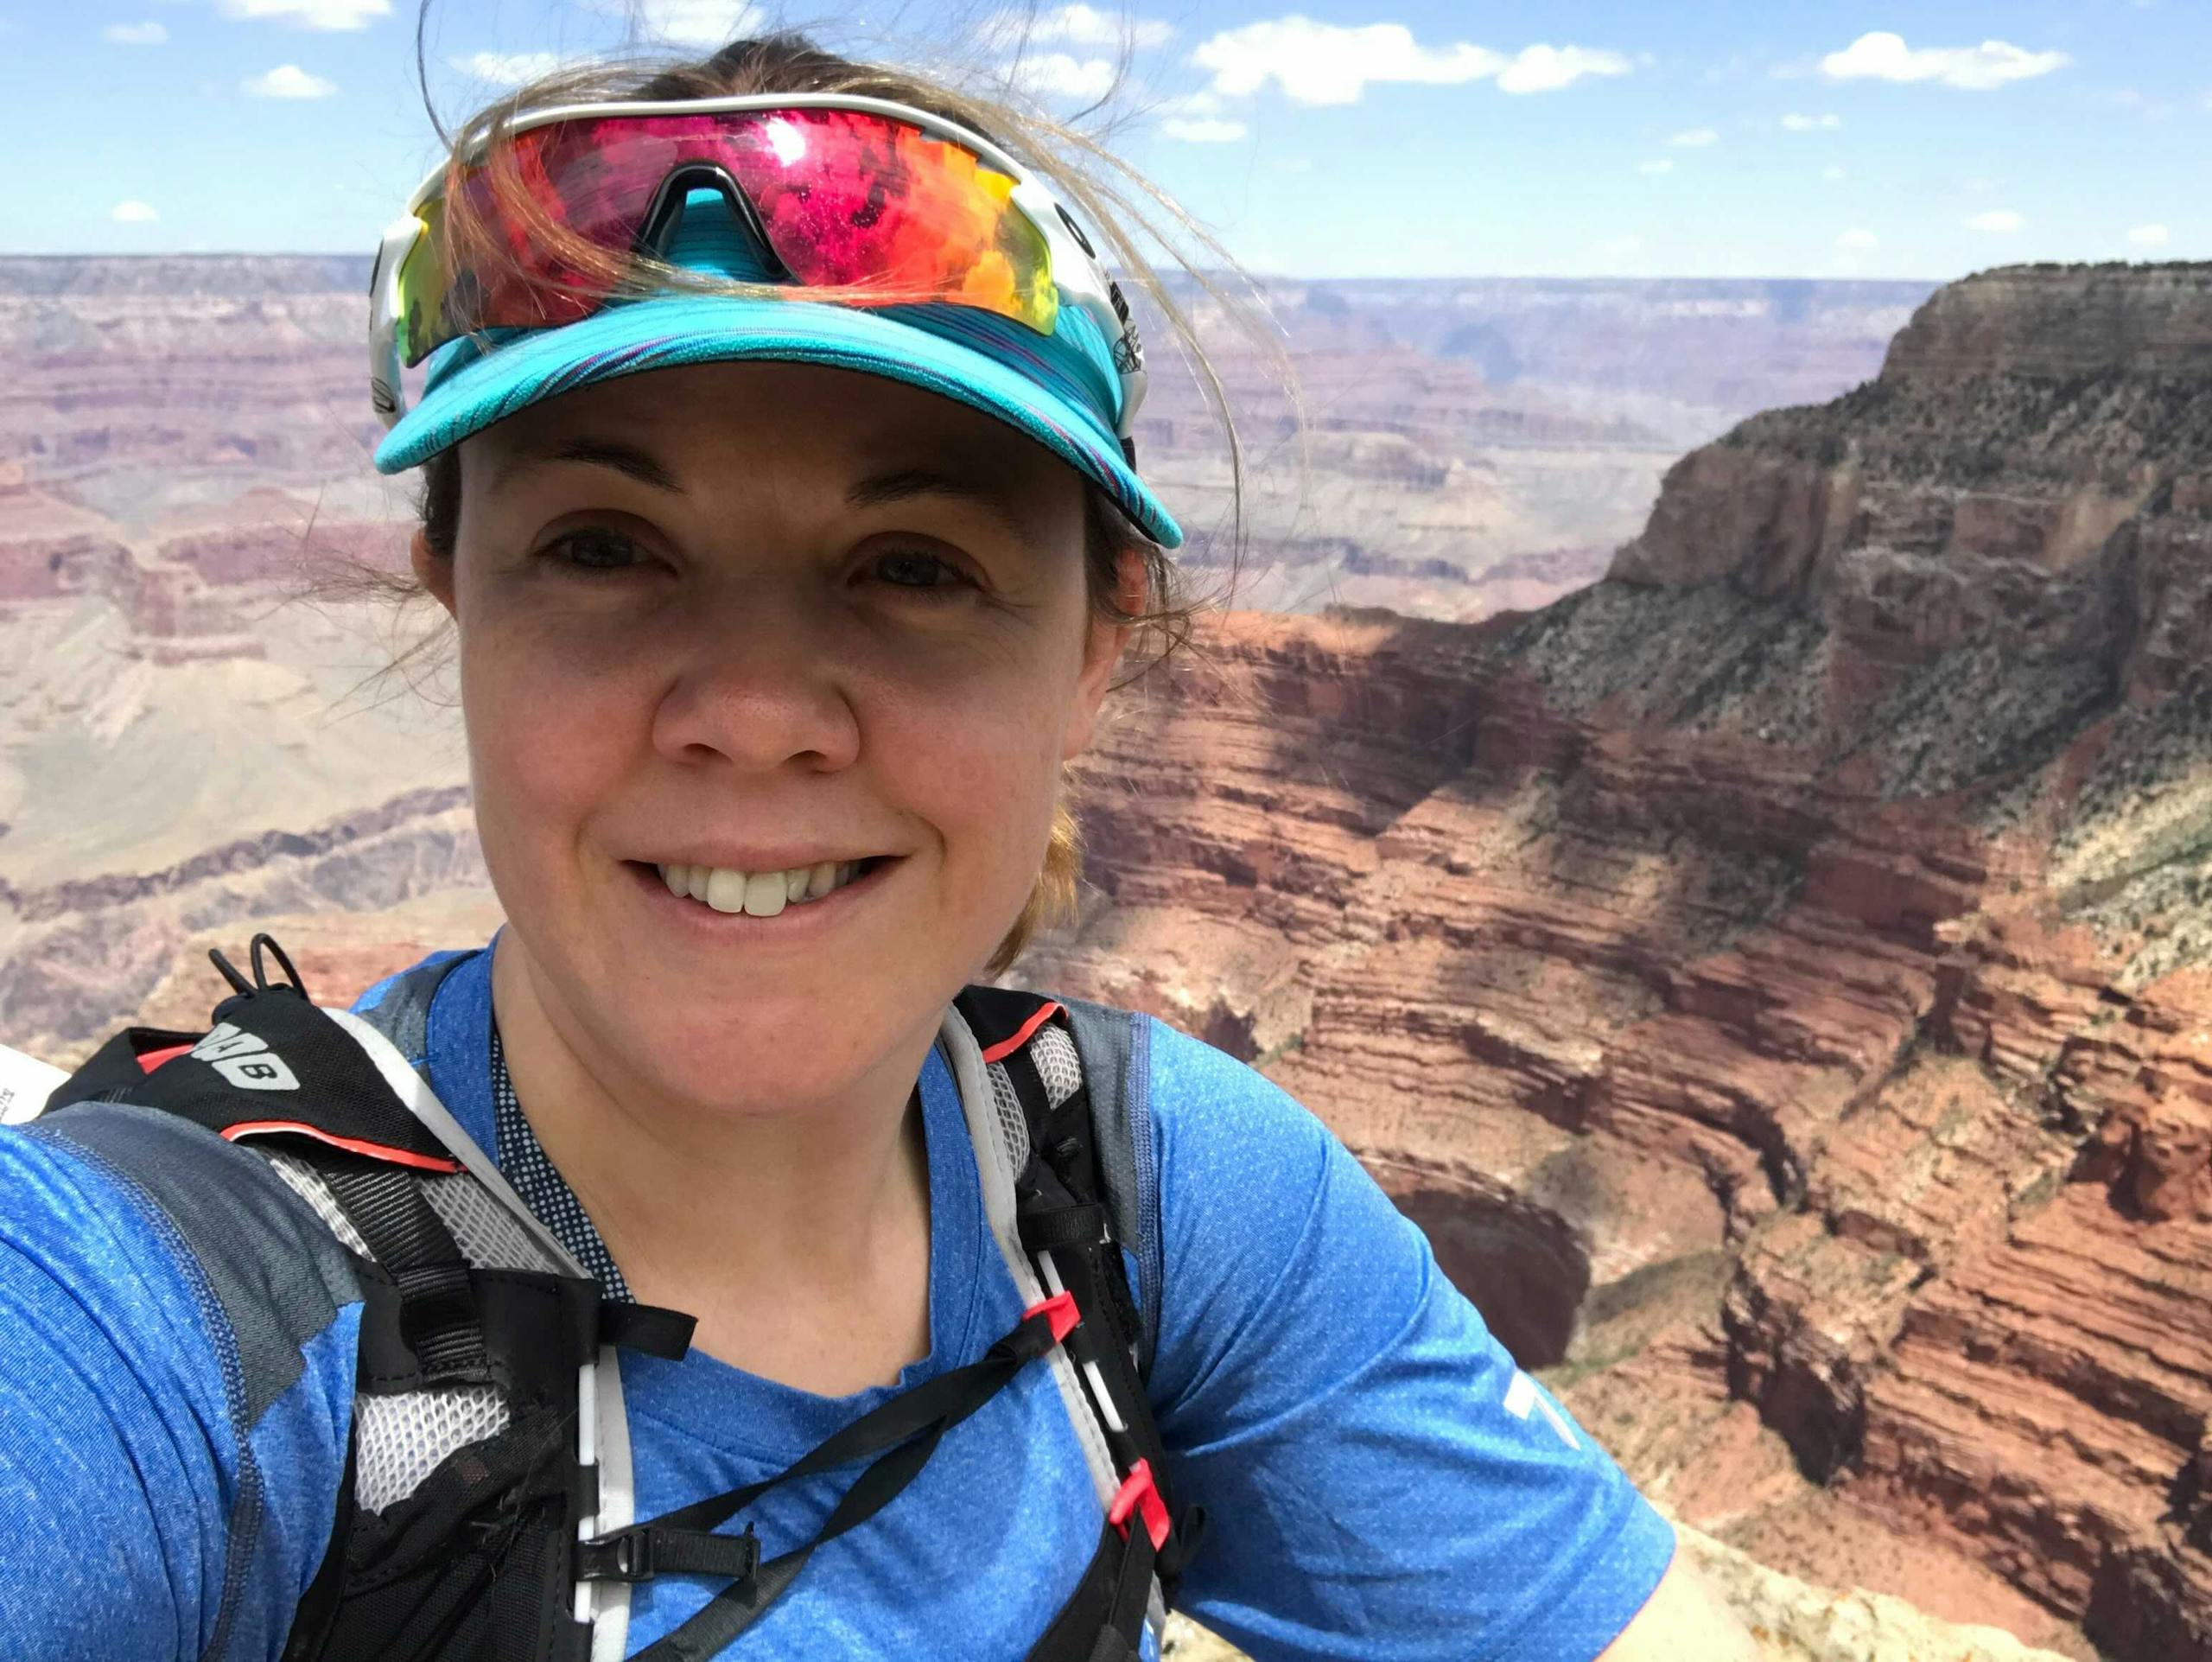 Helen's selfie by the Grand Canyon